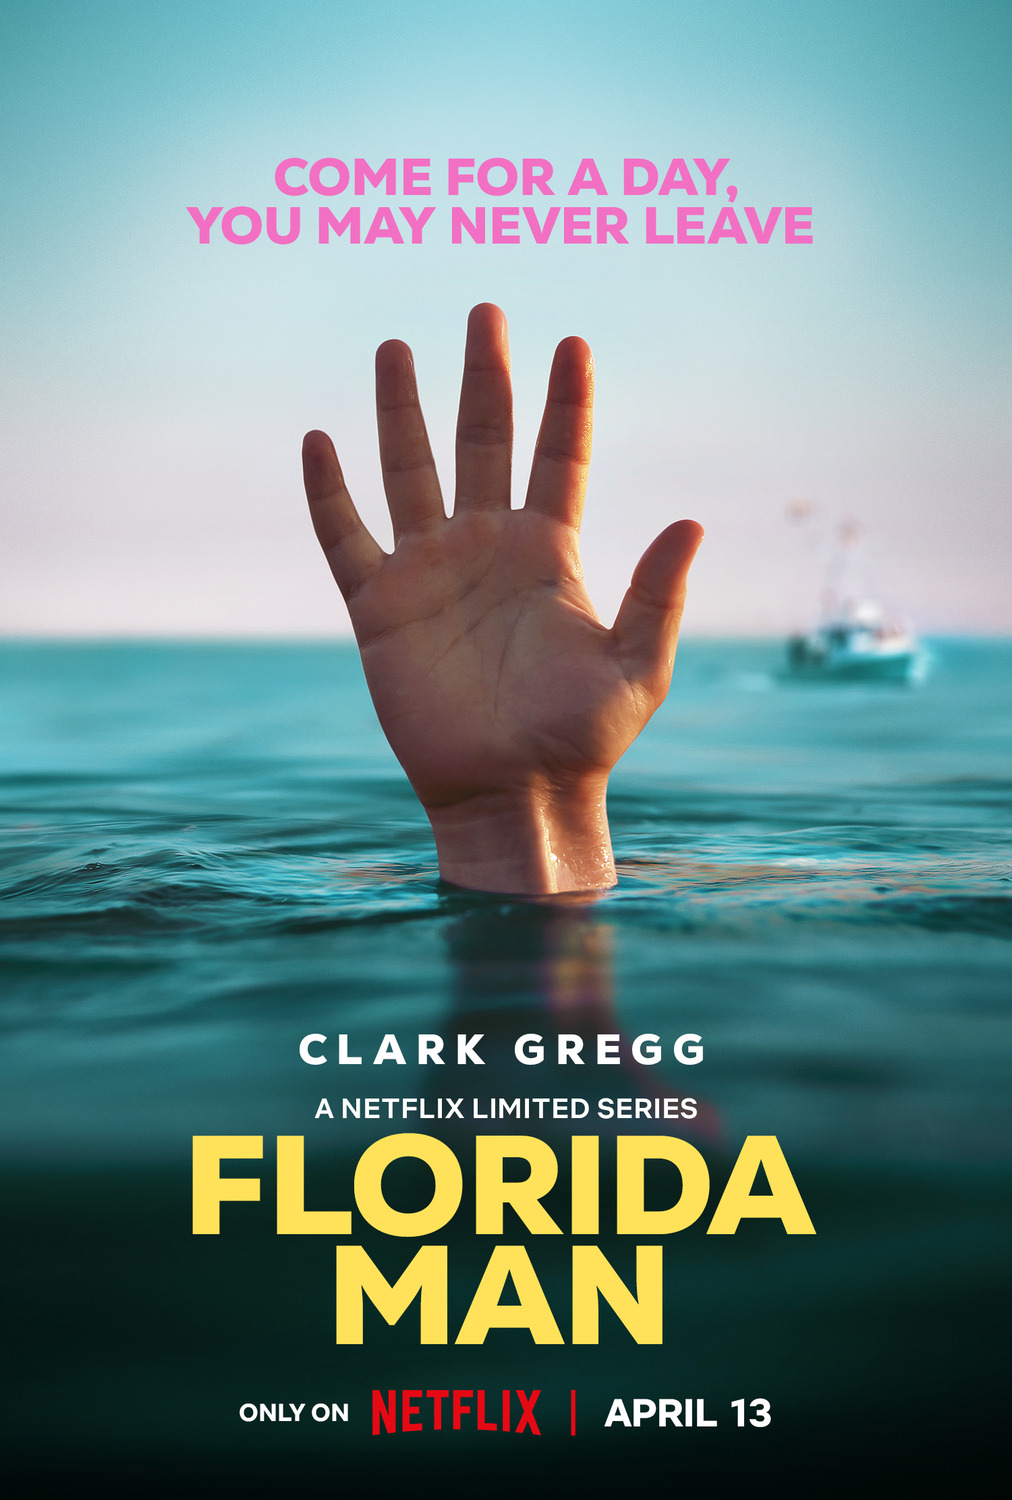 Extra Large TV Poster Image for Florida Man (#6 of 20)